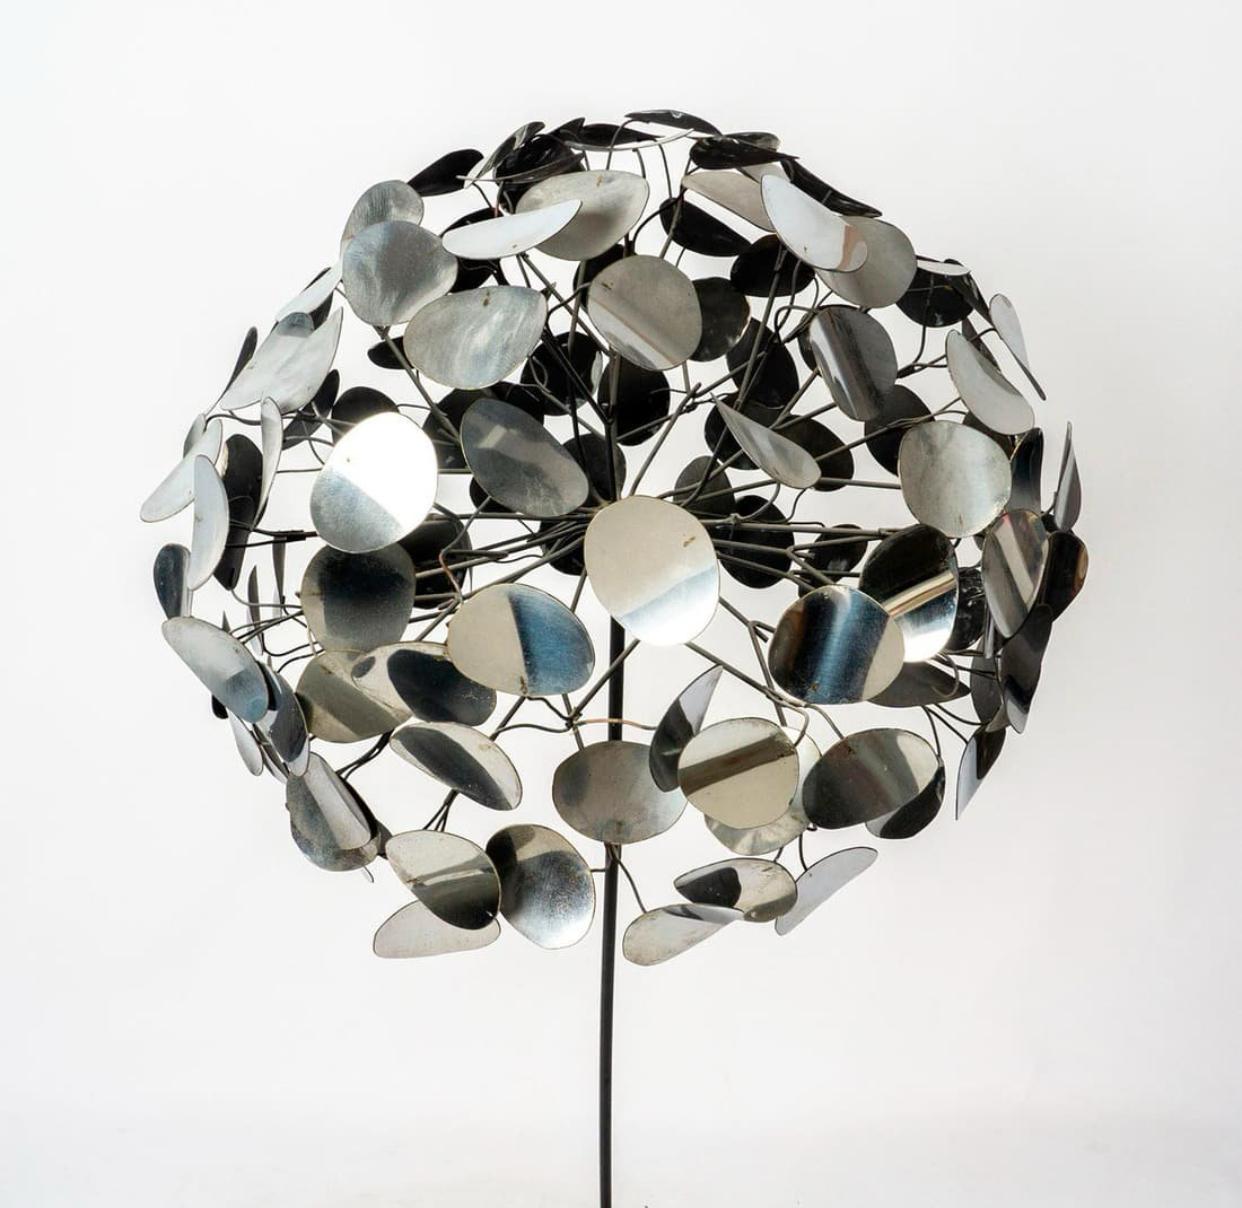 Authentic 1970 C. Jere Raindrops Tree Sculpture. Not a reproduction. The piece is made of chrome plated metal circles or “raindrops” welded to iron branches in the shape of a round topiary garden tree or shrub. This round ball like piece is then